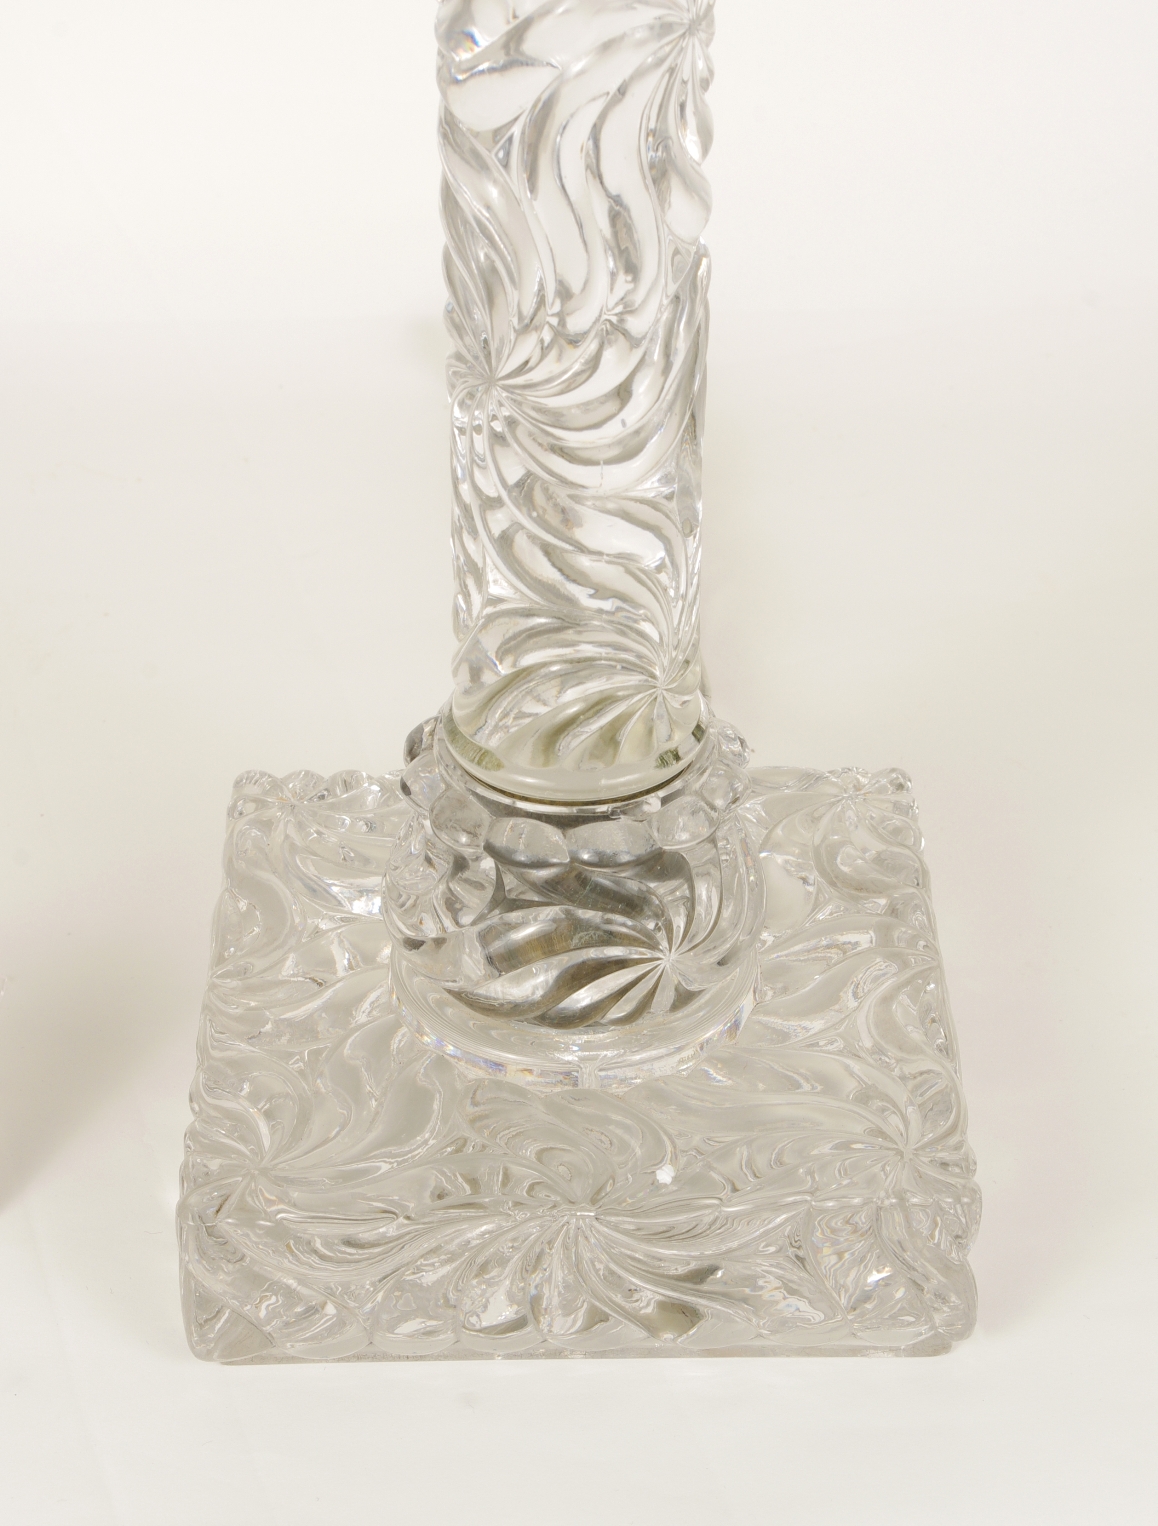 Signed Baccarat Crystal Lamp, c. 1880